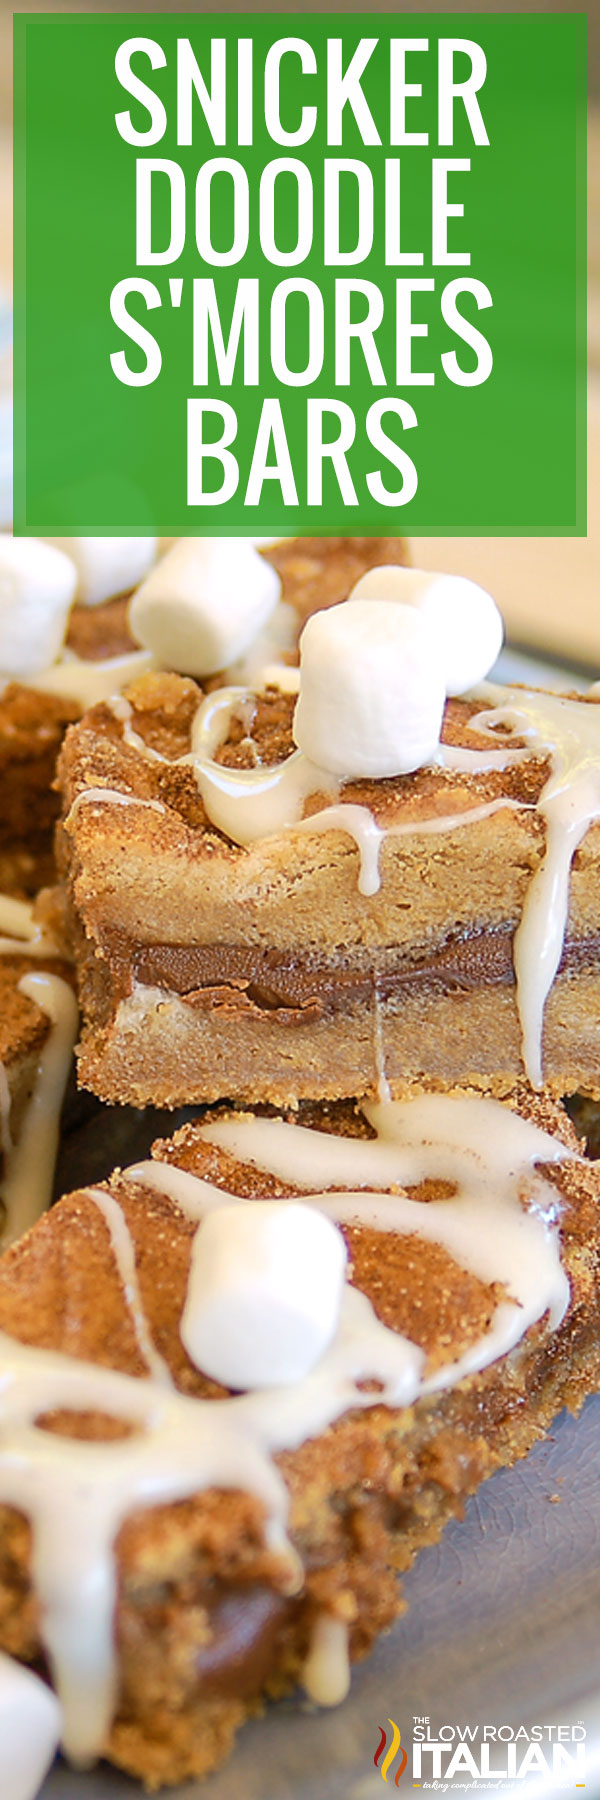 Snickerdoodle S'mores Bars - PIN